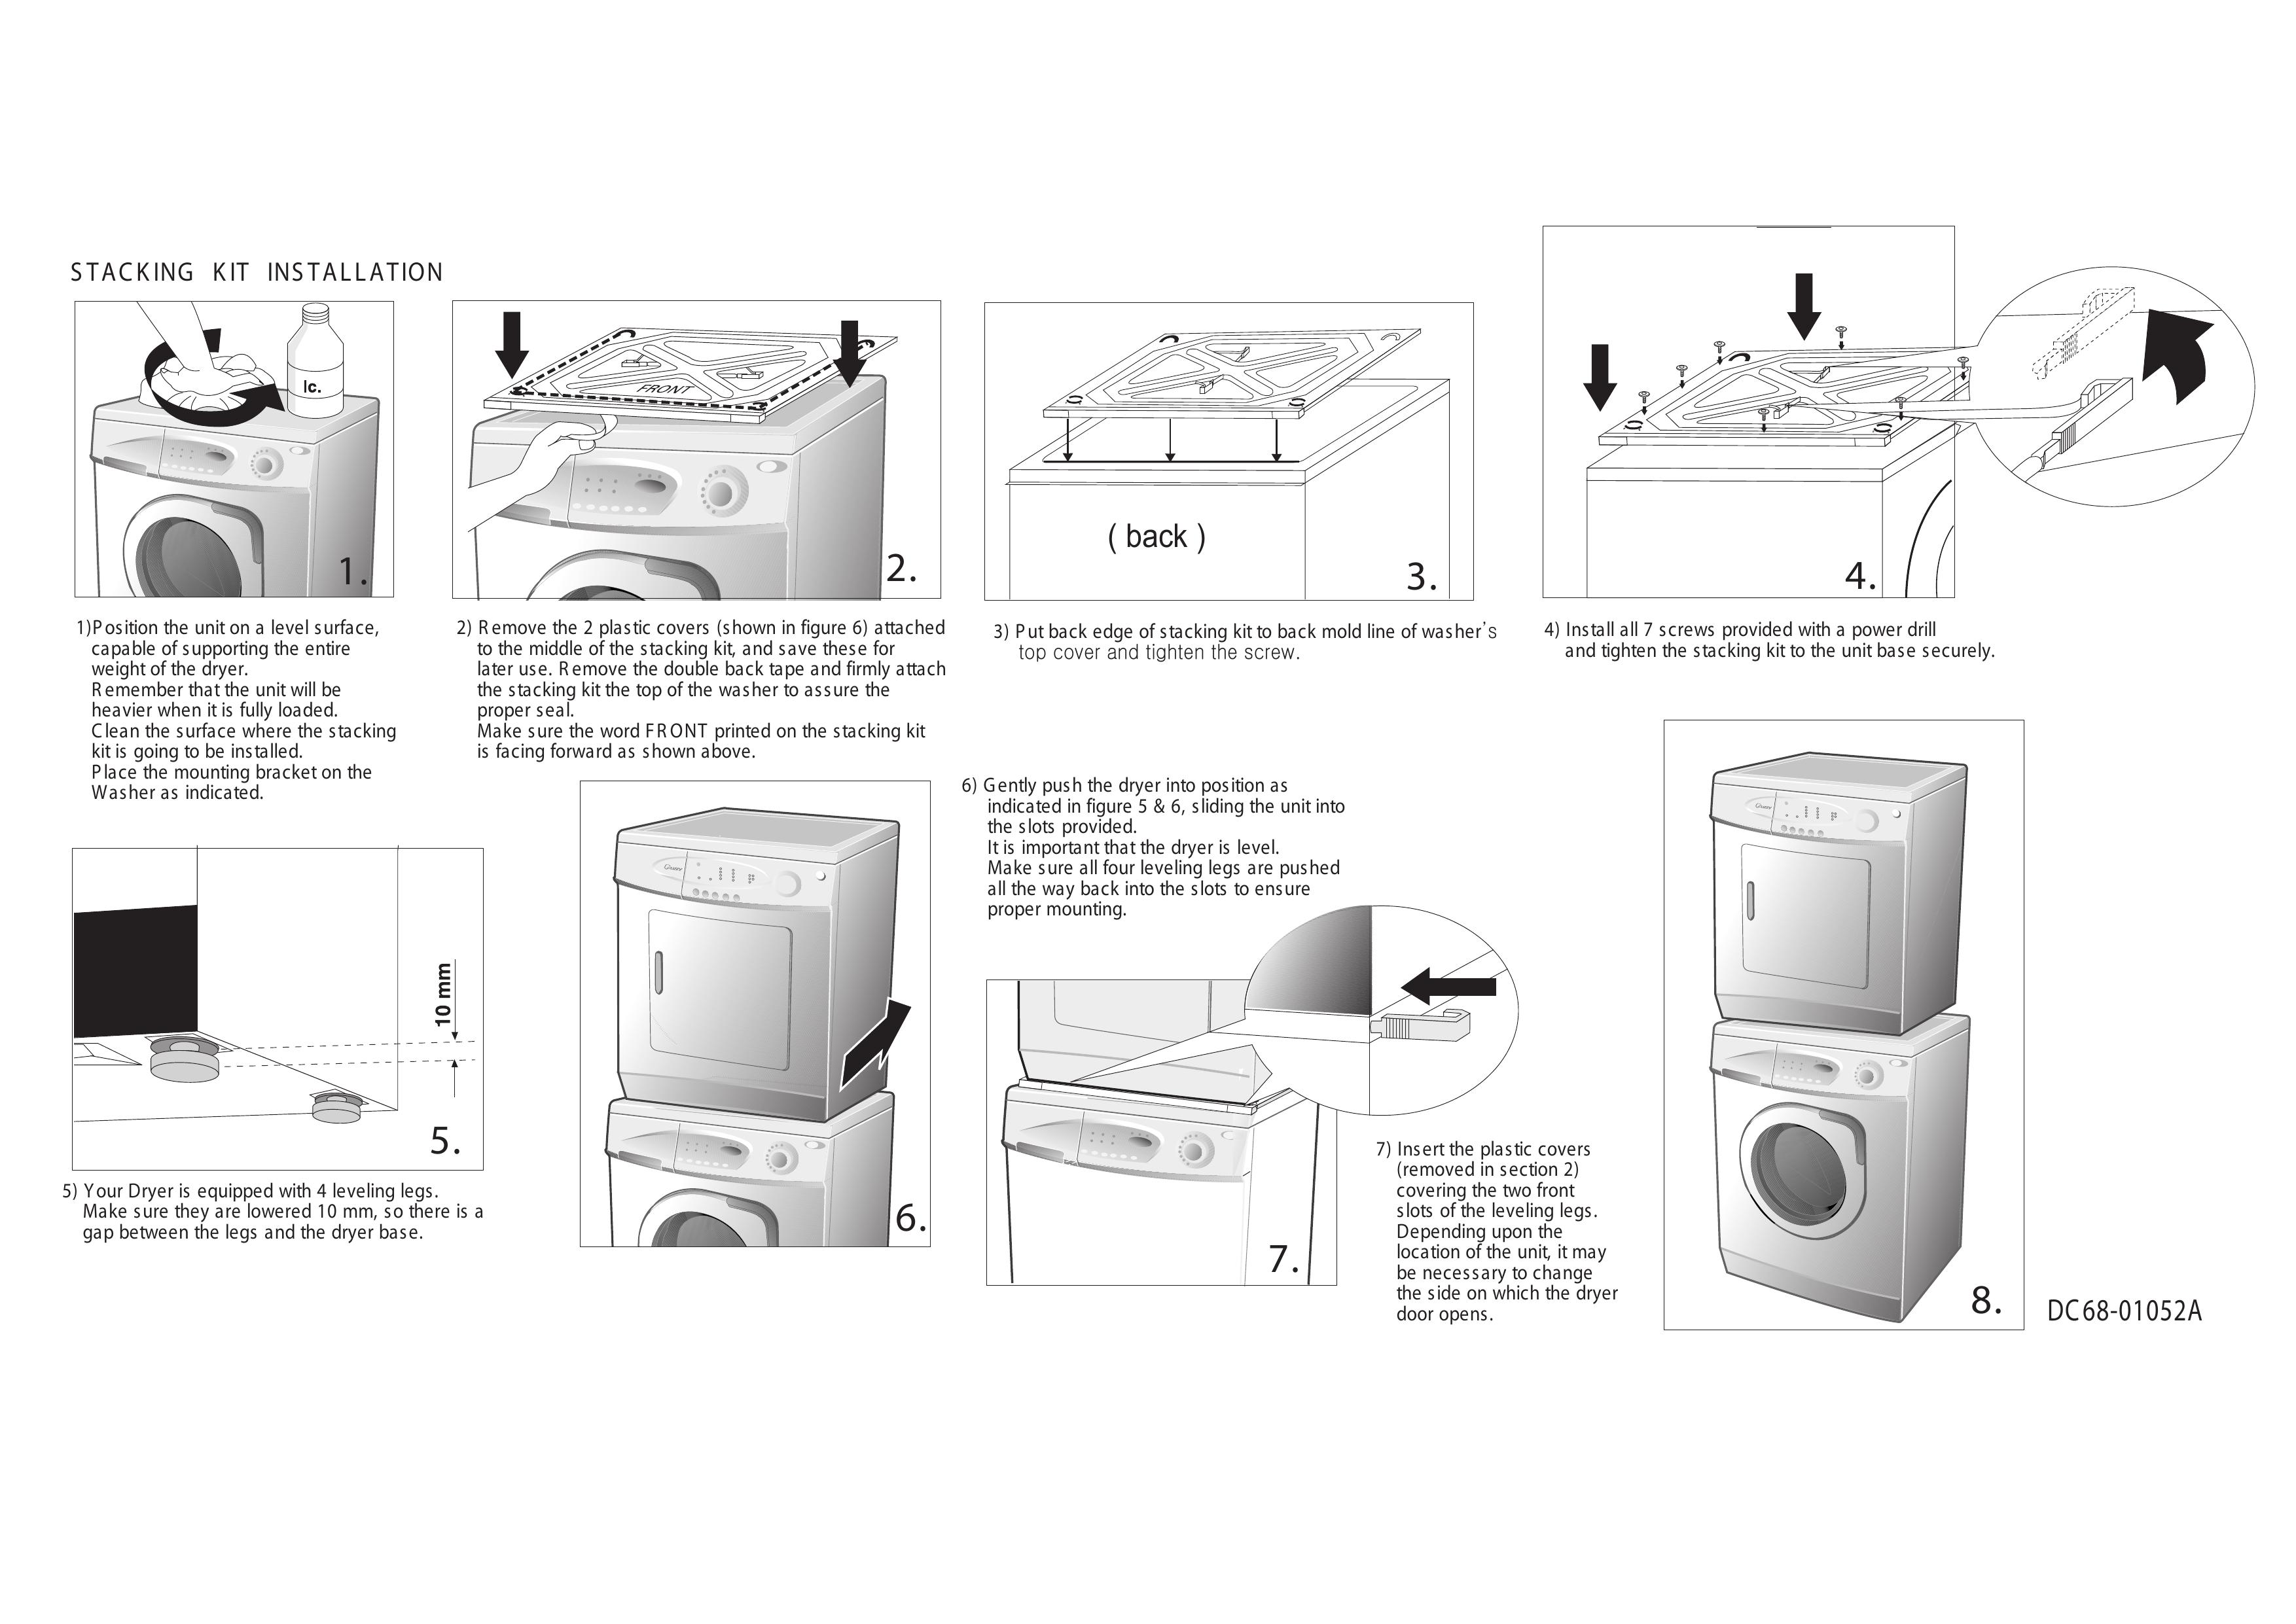 Maytag DC68-01052A Washer Accessories User Manual